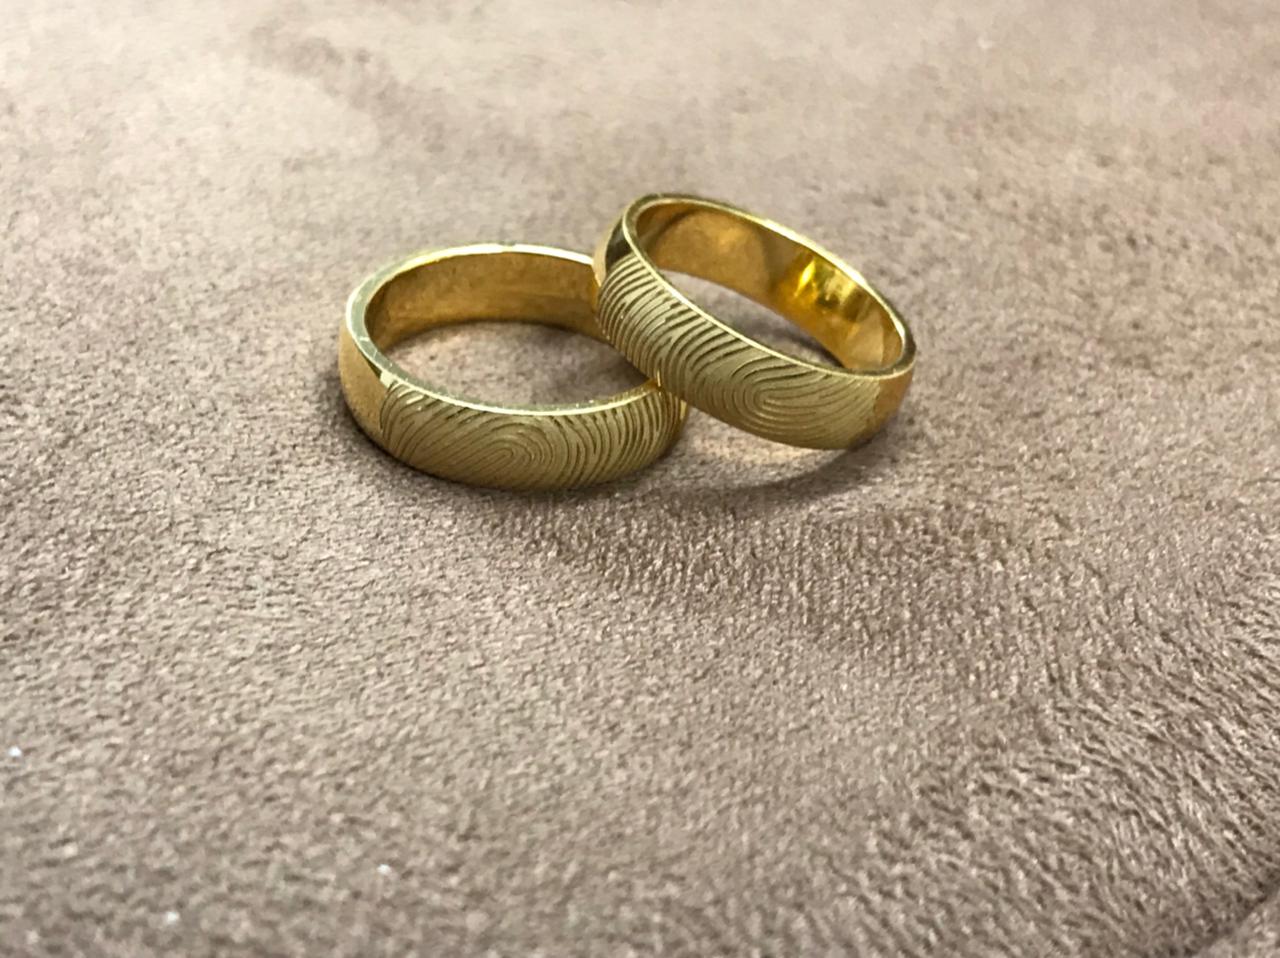 COUPLE RINGS.(18KT) | Couple ring design, Jewelry rings engagement, Wedding  rings sets his and hers